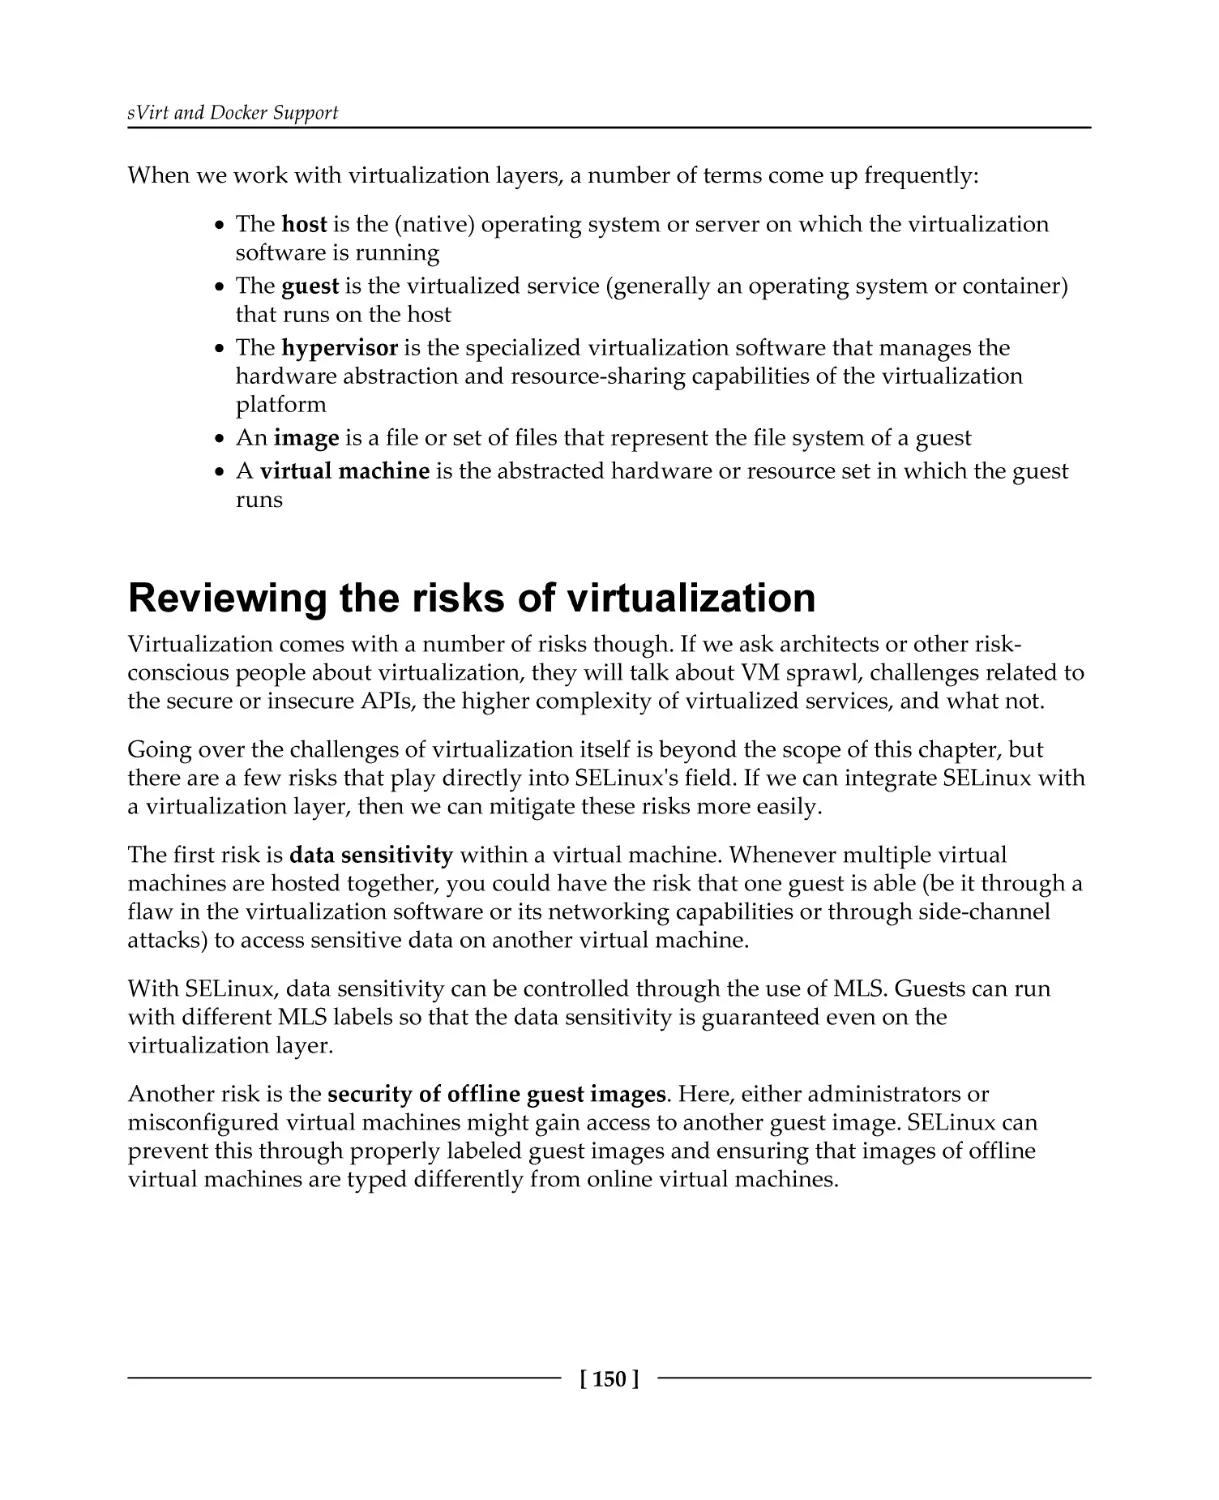 Reviewing the risks of virtualization